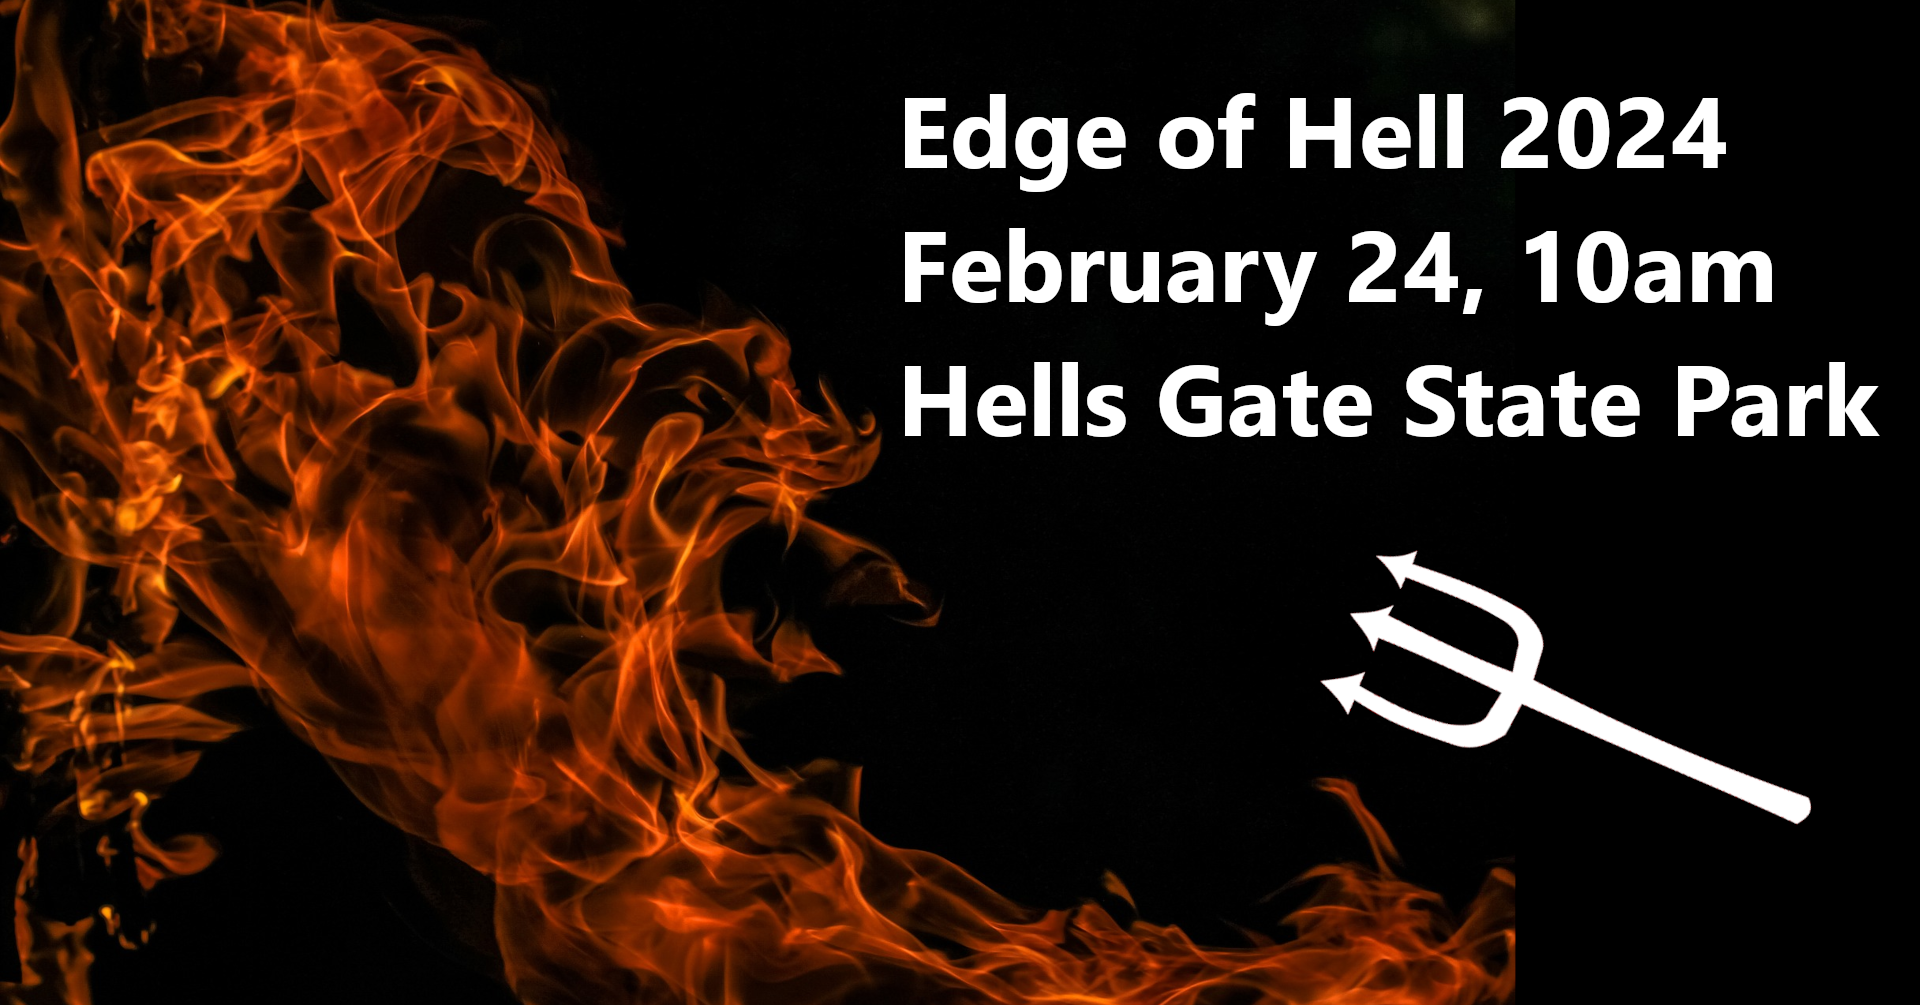 Edge of Hell 2024